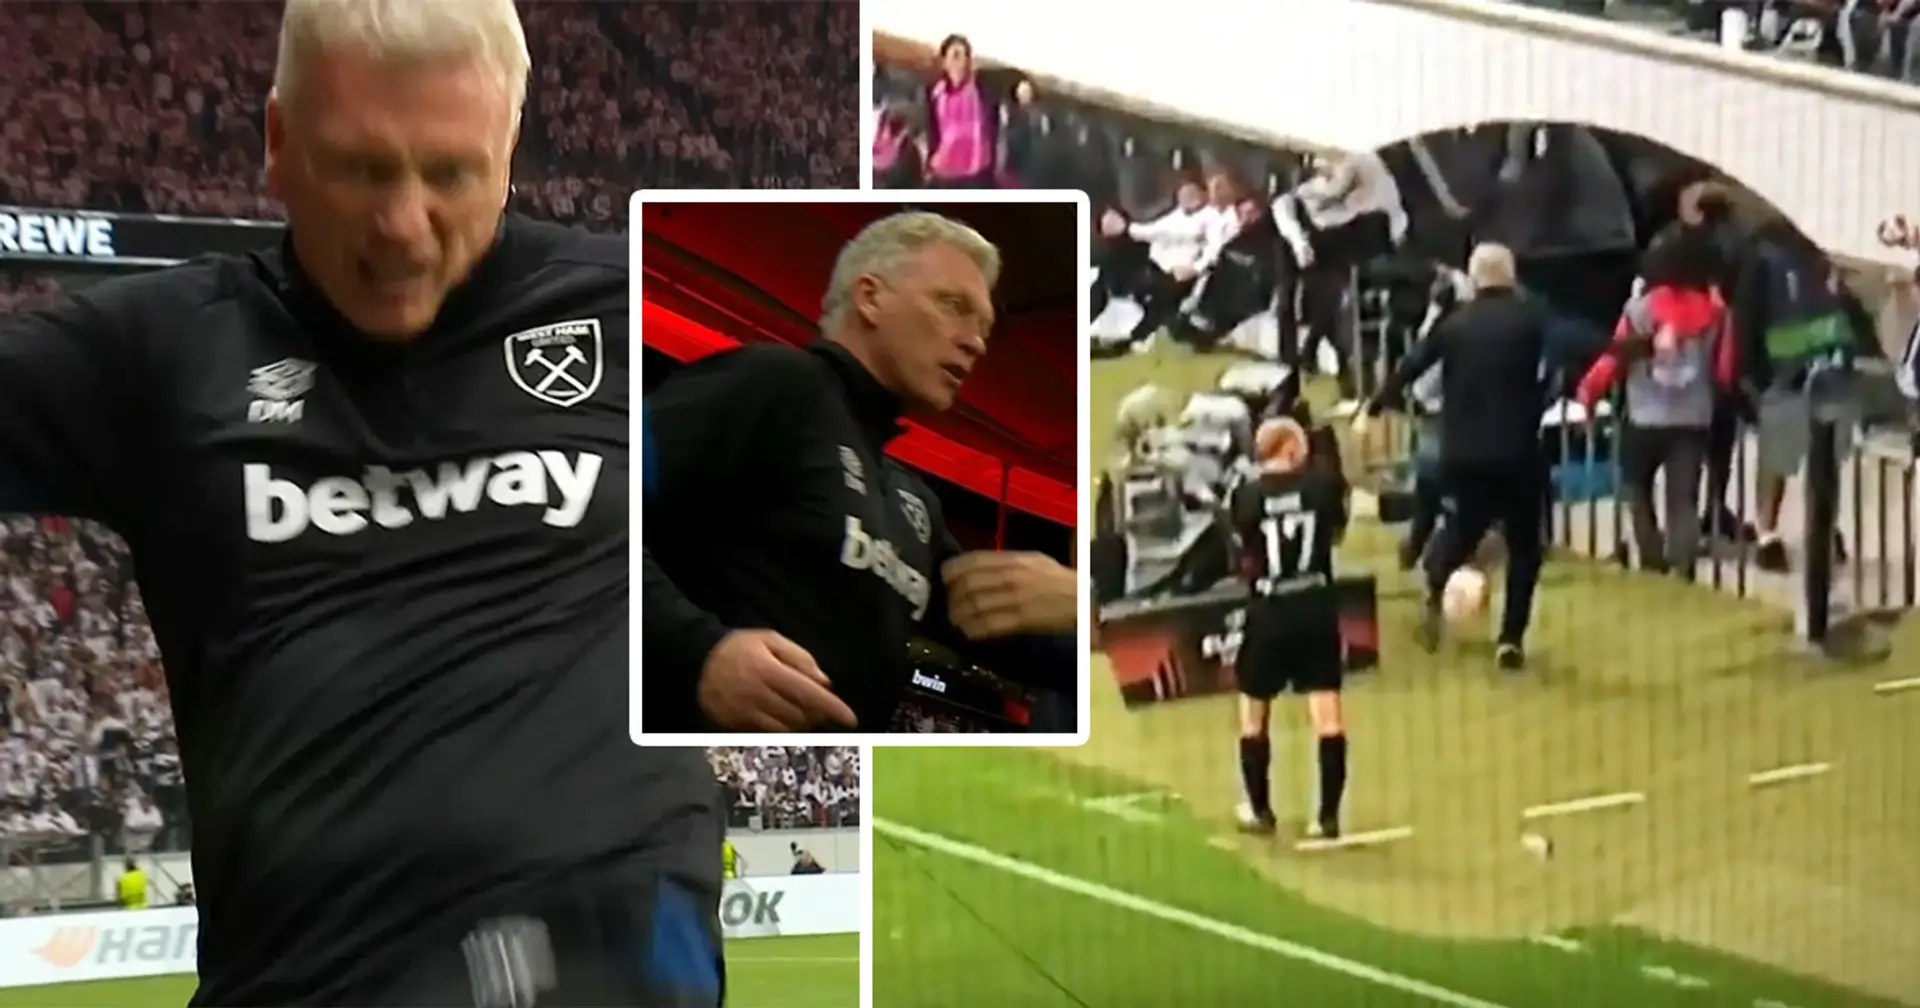 David Moyes sent off after kicking ball at ball boy during West Ham's Europa League exit